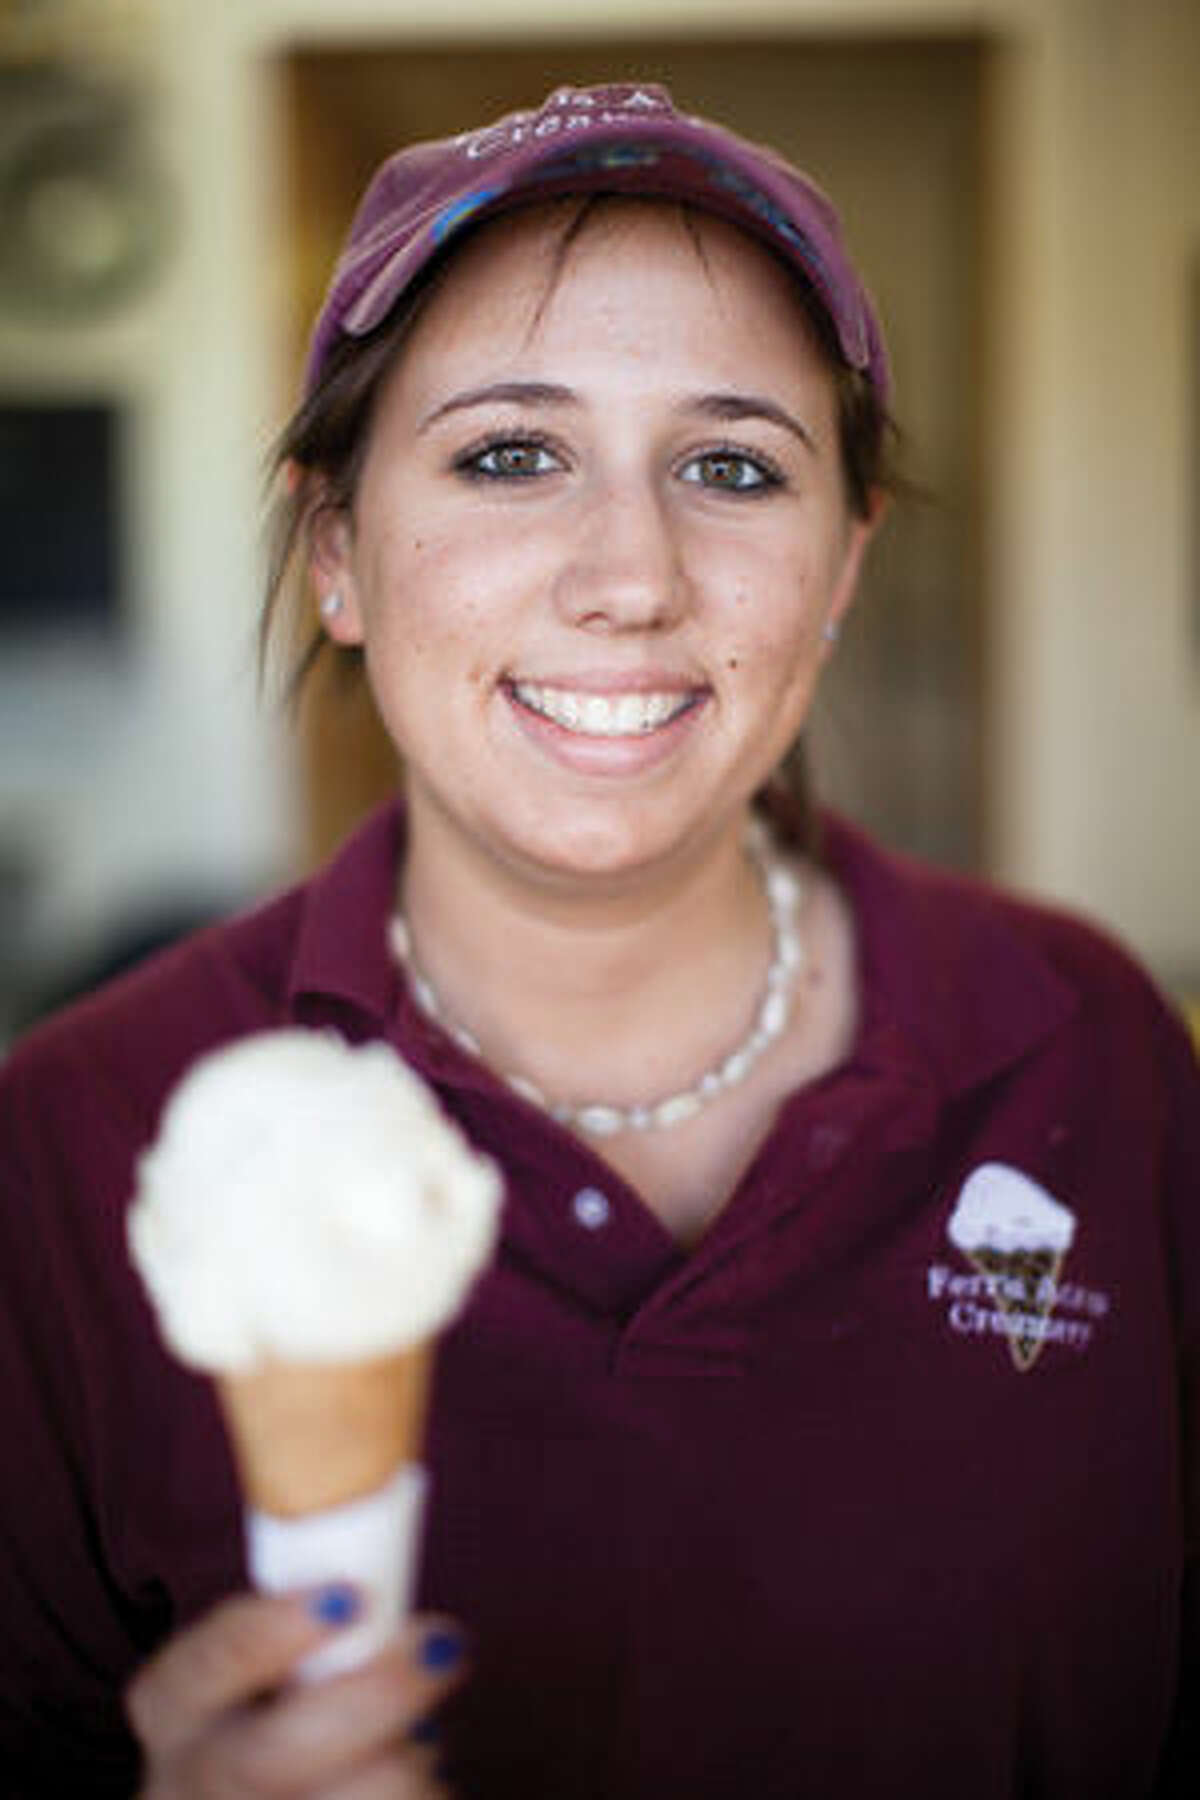 A scoop or two is waiting for you at Ferris Acres Creamery.